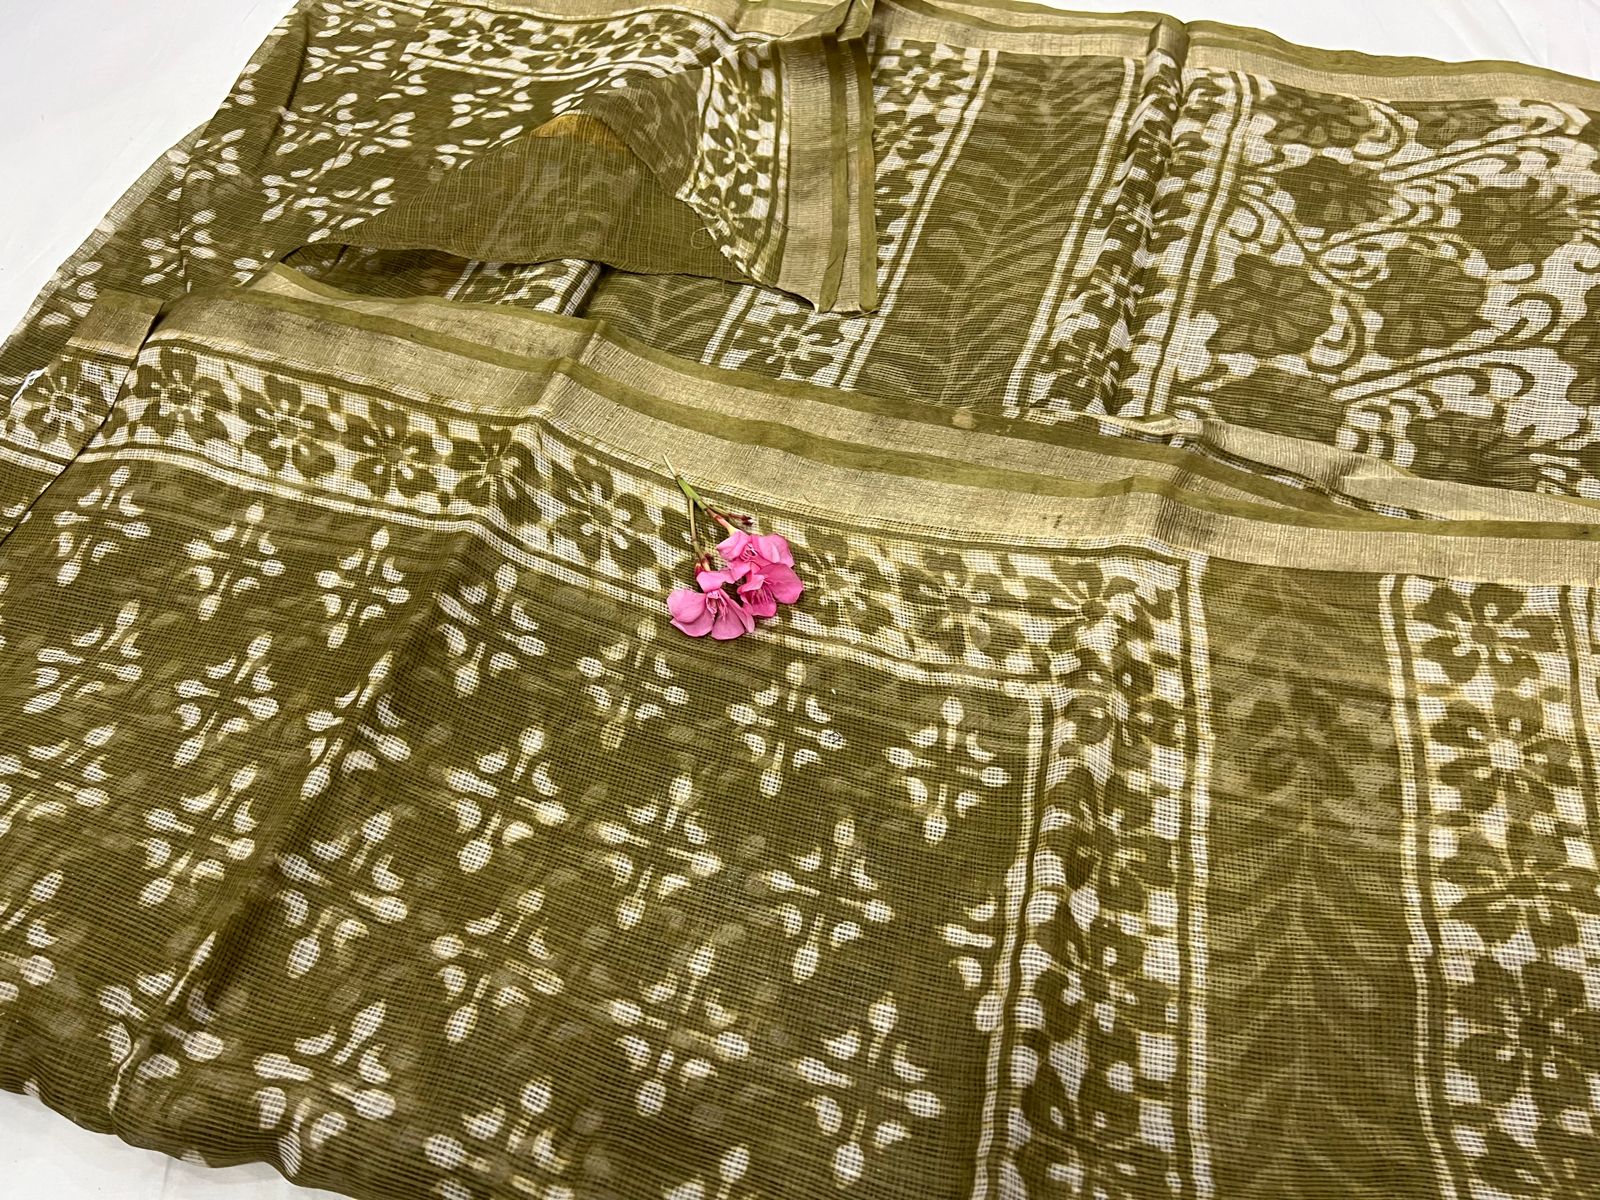 Buy Mul Mul Cotton Sarees With Printed Borderscotton Saree Online in India   Etsy